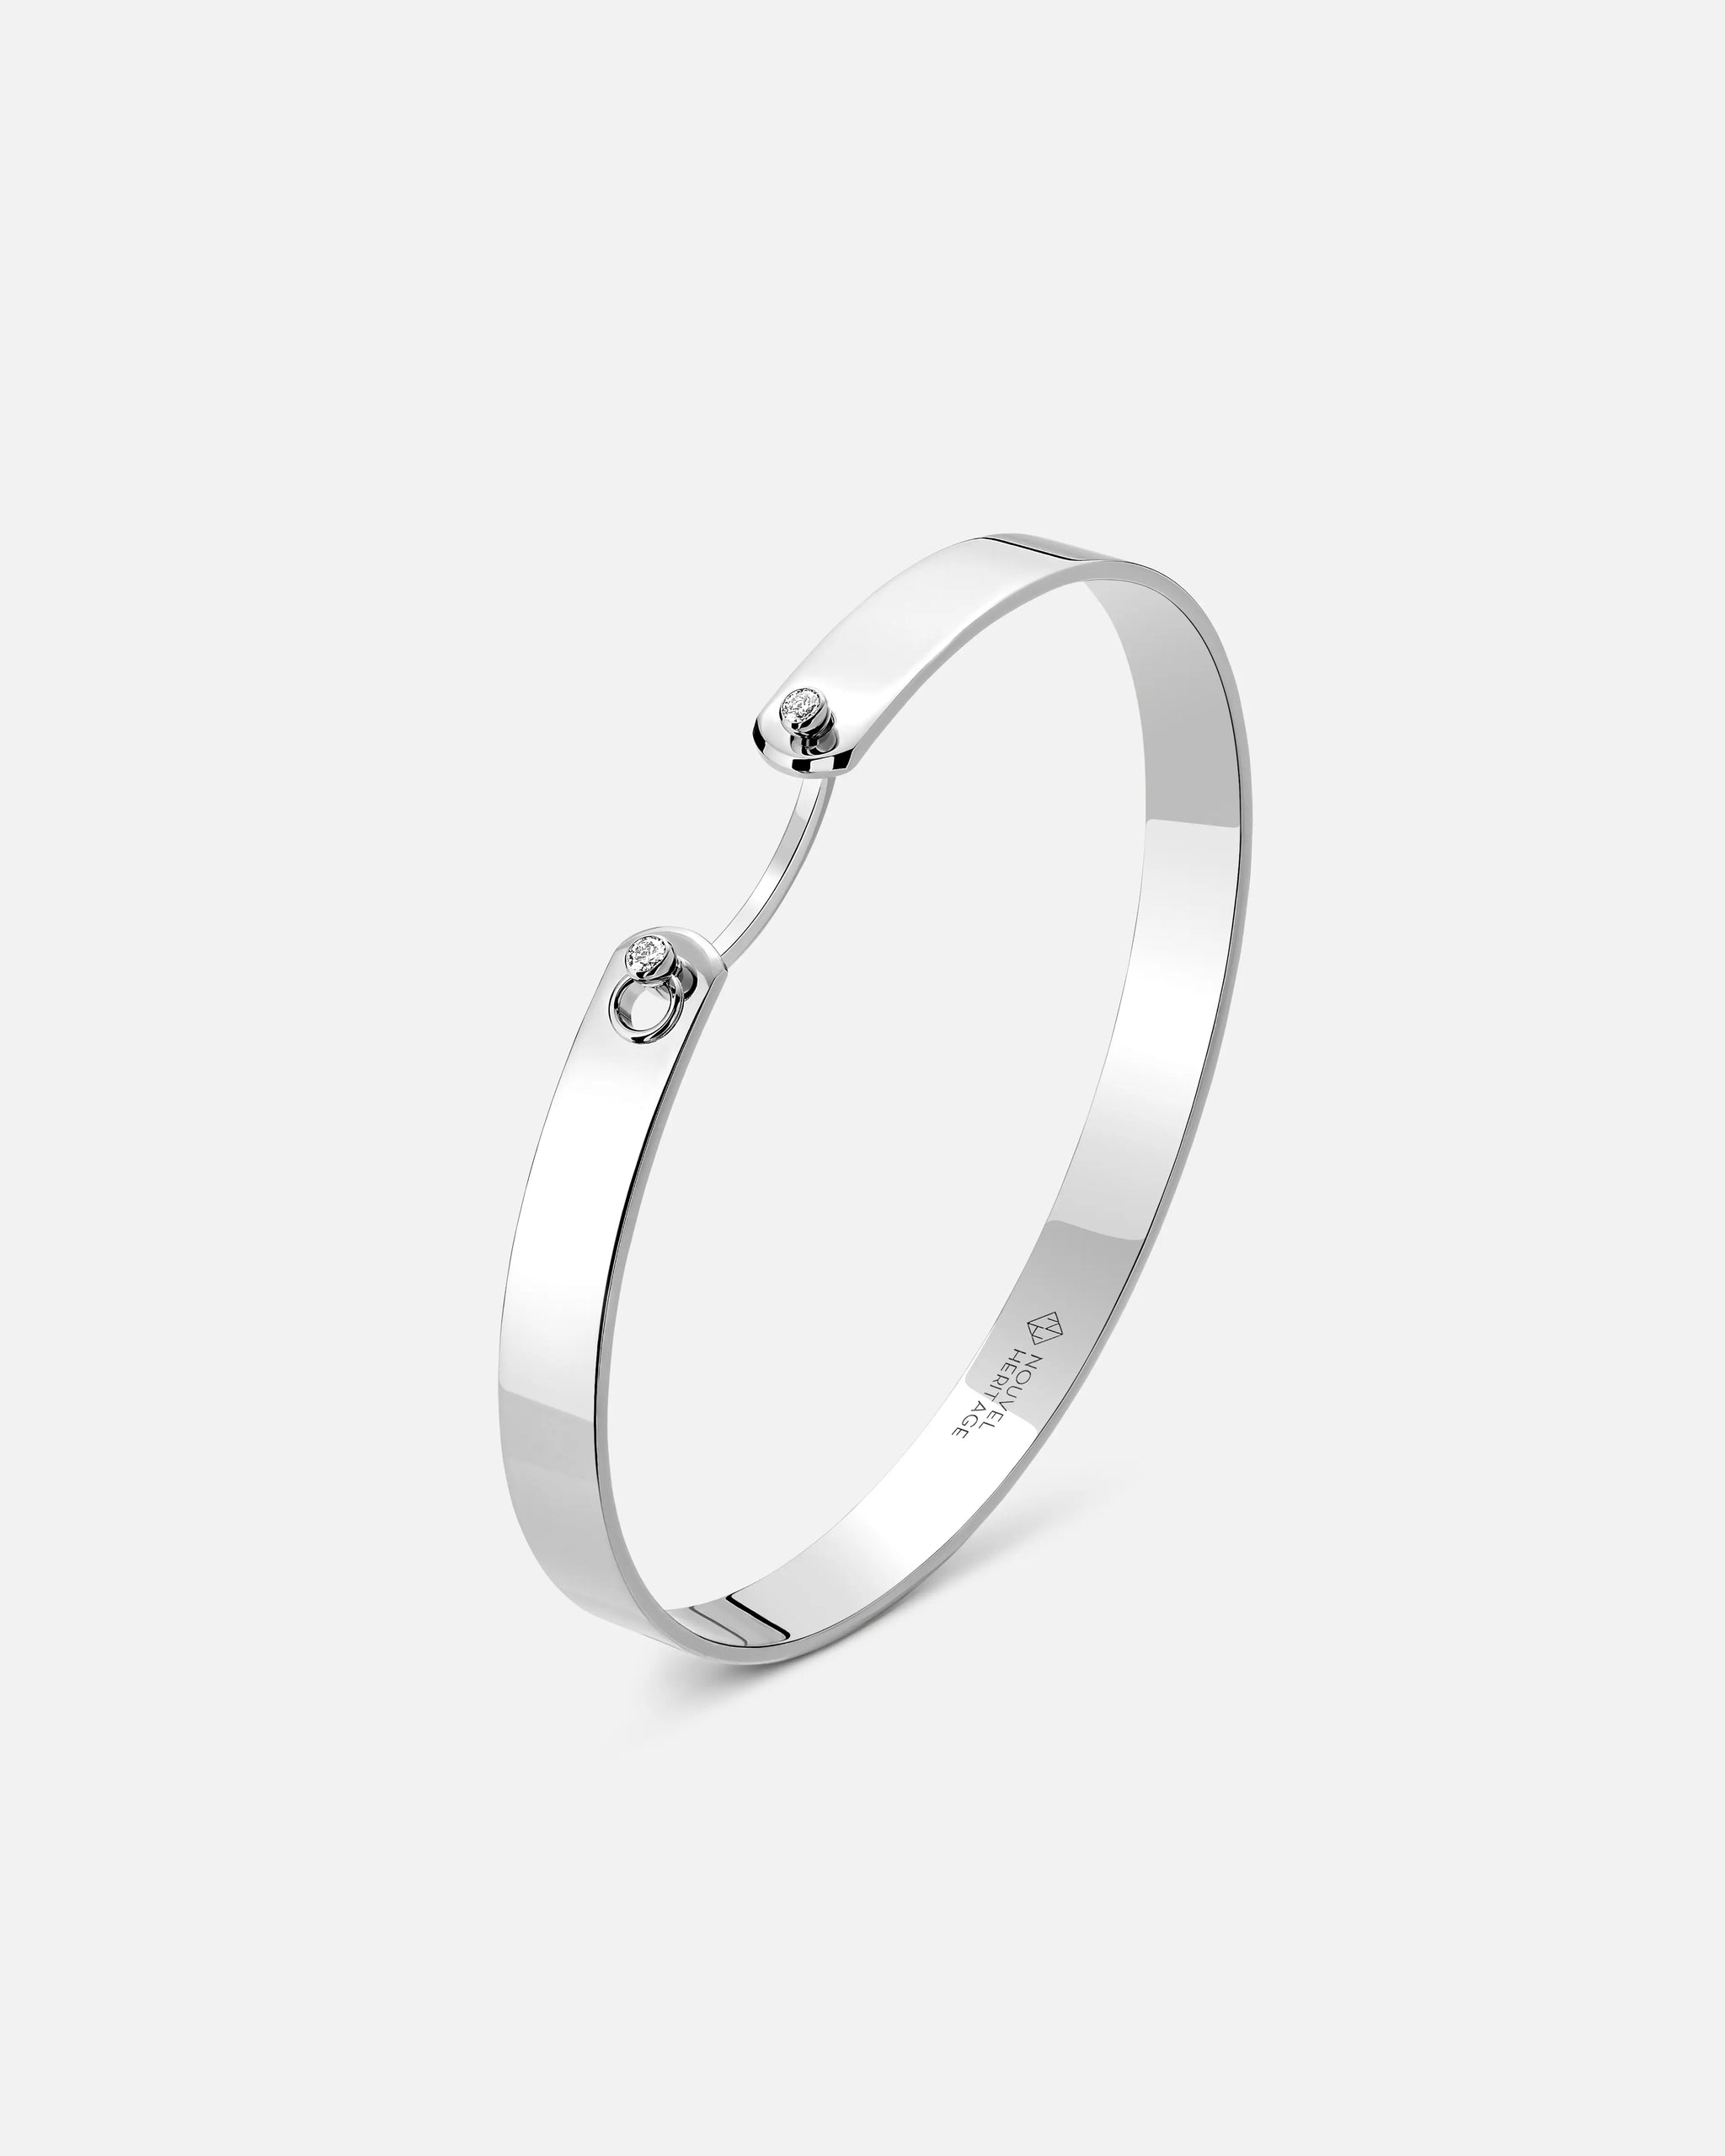 Monday Morning GM Mood Bangle in White Gold - 1 - Nouvel Heritage